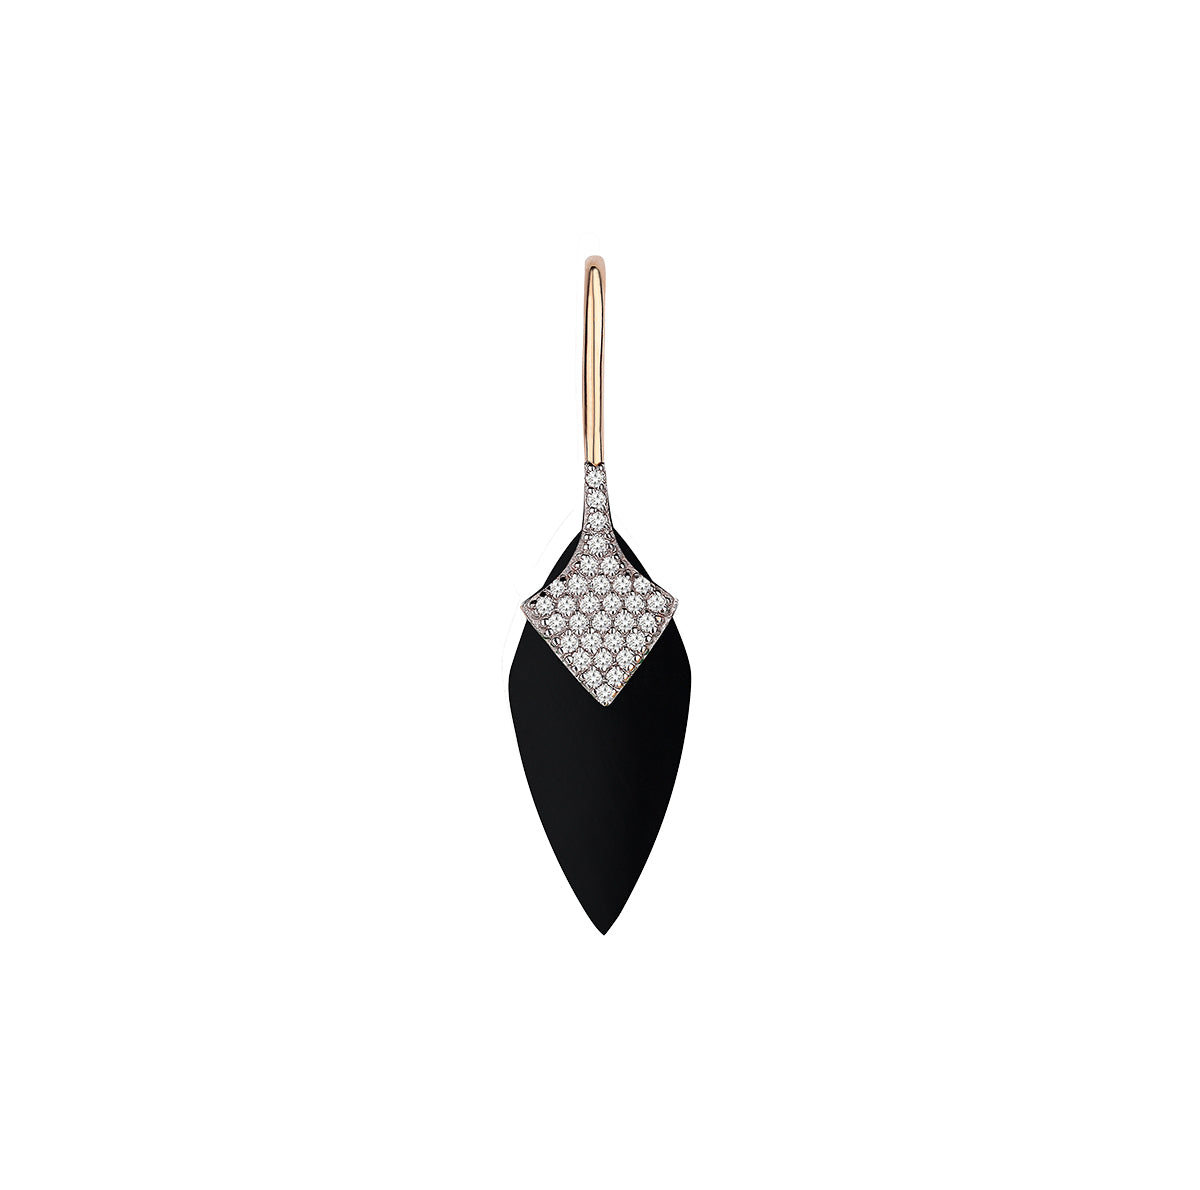 Drop Of Life Earring in Rose Gold - Her Story Shop